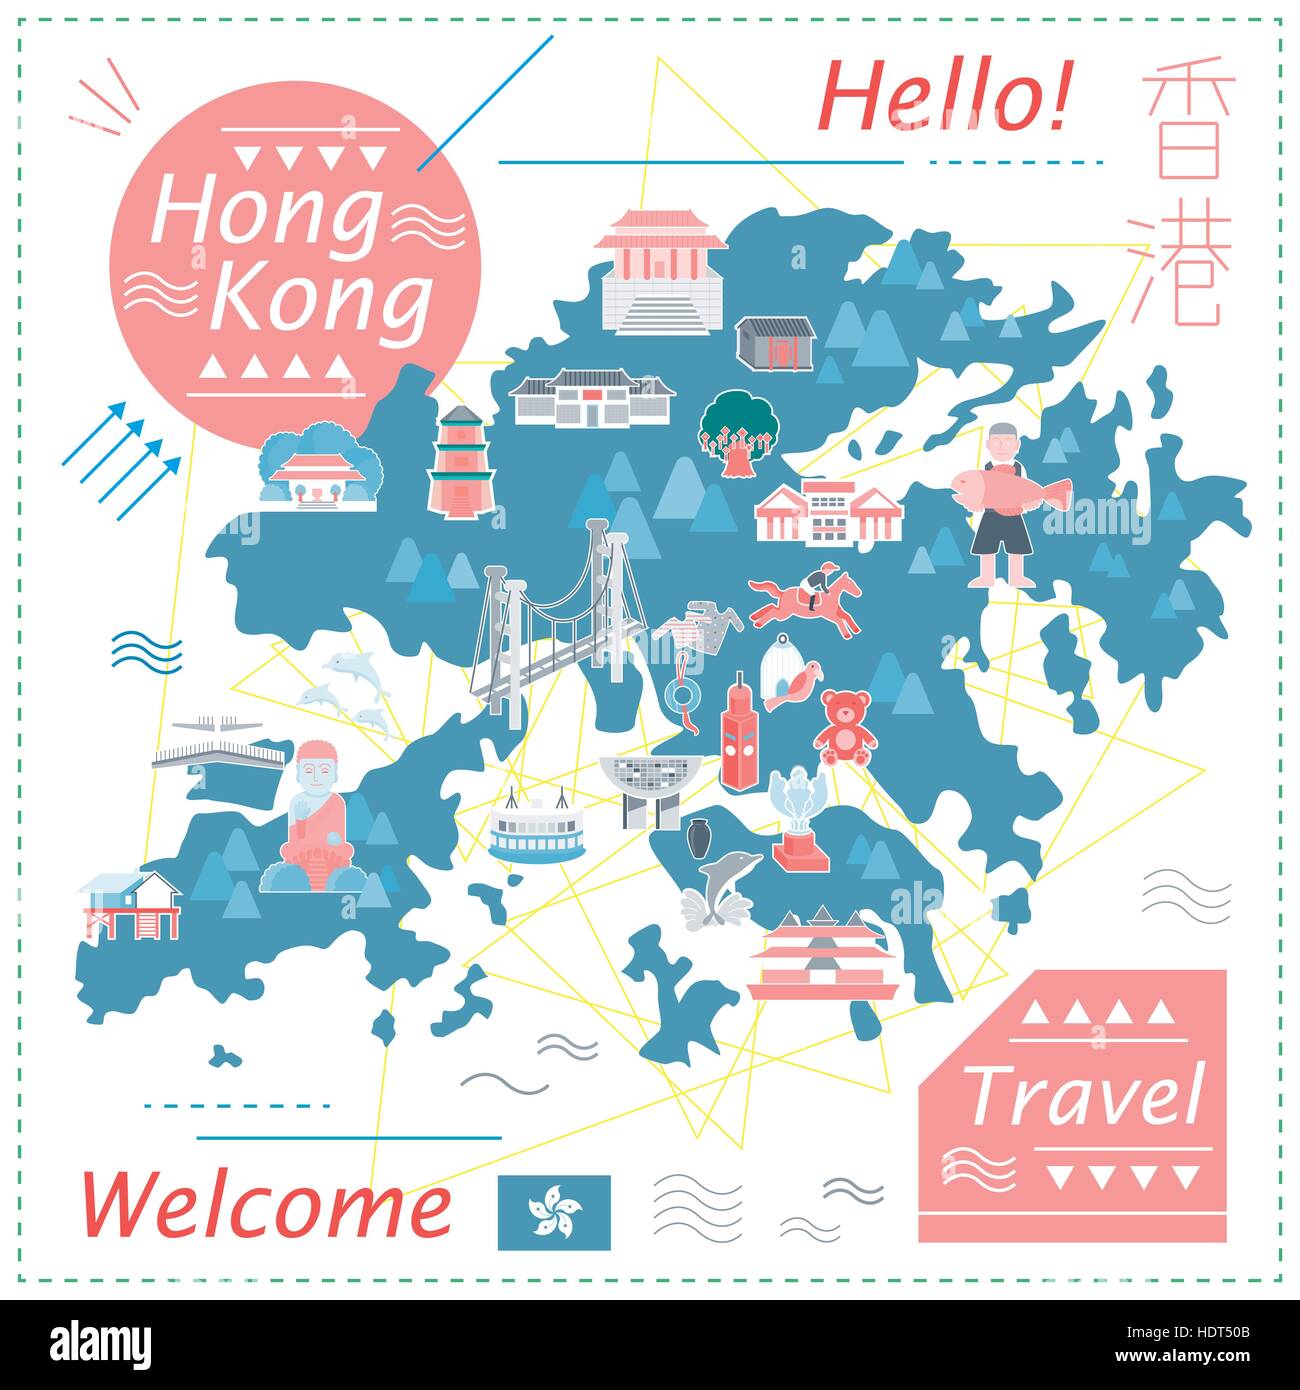 Lovely Hong Kong Map Design In Flat Style The Upper Right Title Is